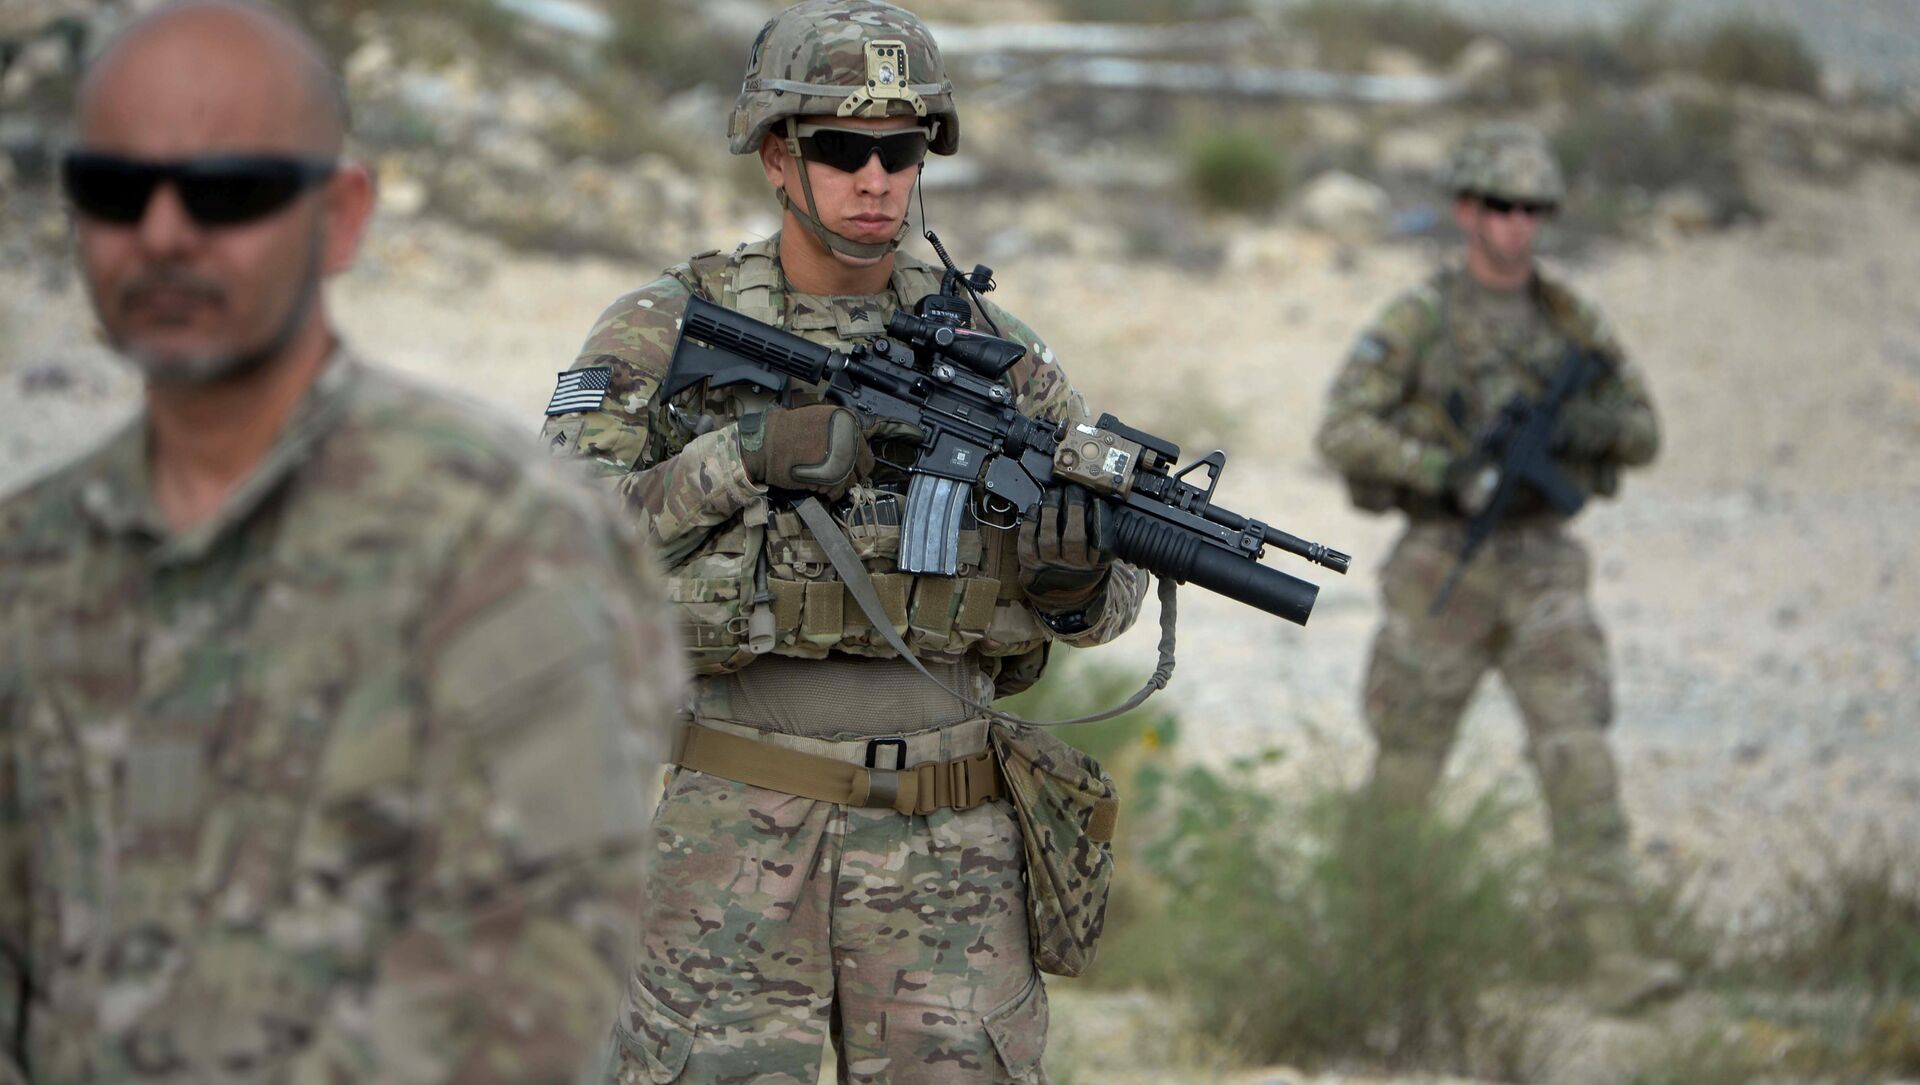 US soldiers part of NATO patrol during the final day of a month long anti-Taliban operation by the Afghan National Army (ANA) in various parts of eastern Nangarhar province, at an Afghan National Army base in Khogyani district on August 30, 2015 - Sputnik International, 1920, 19.08.2021